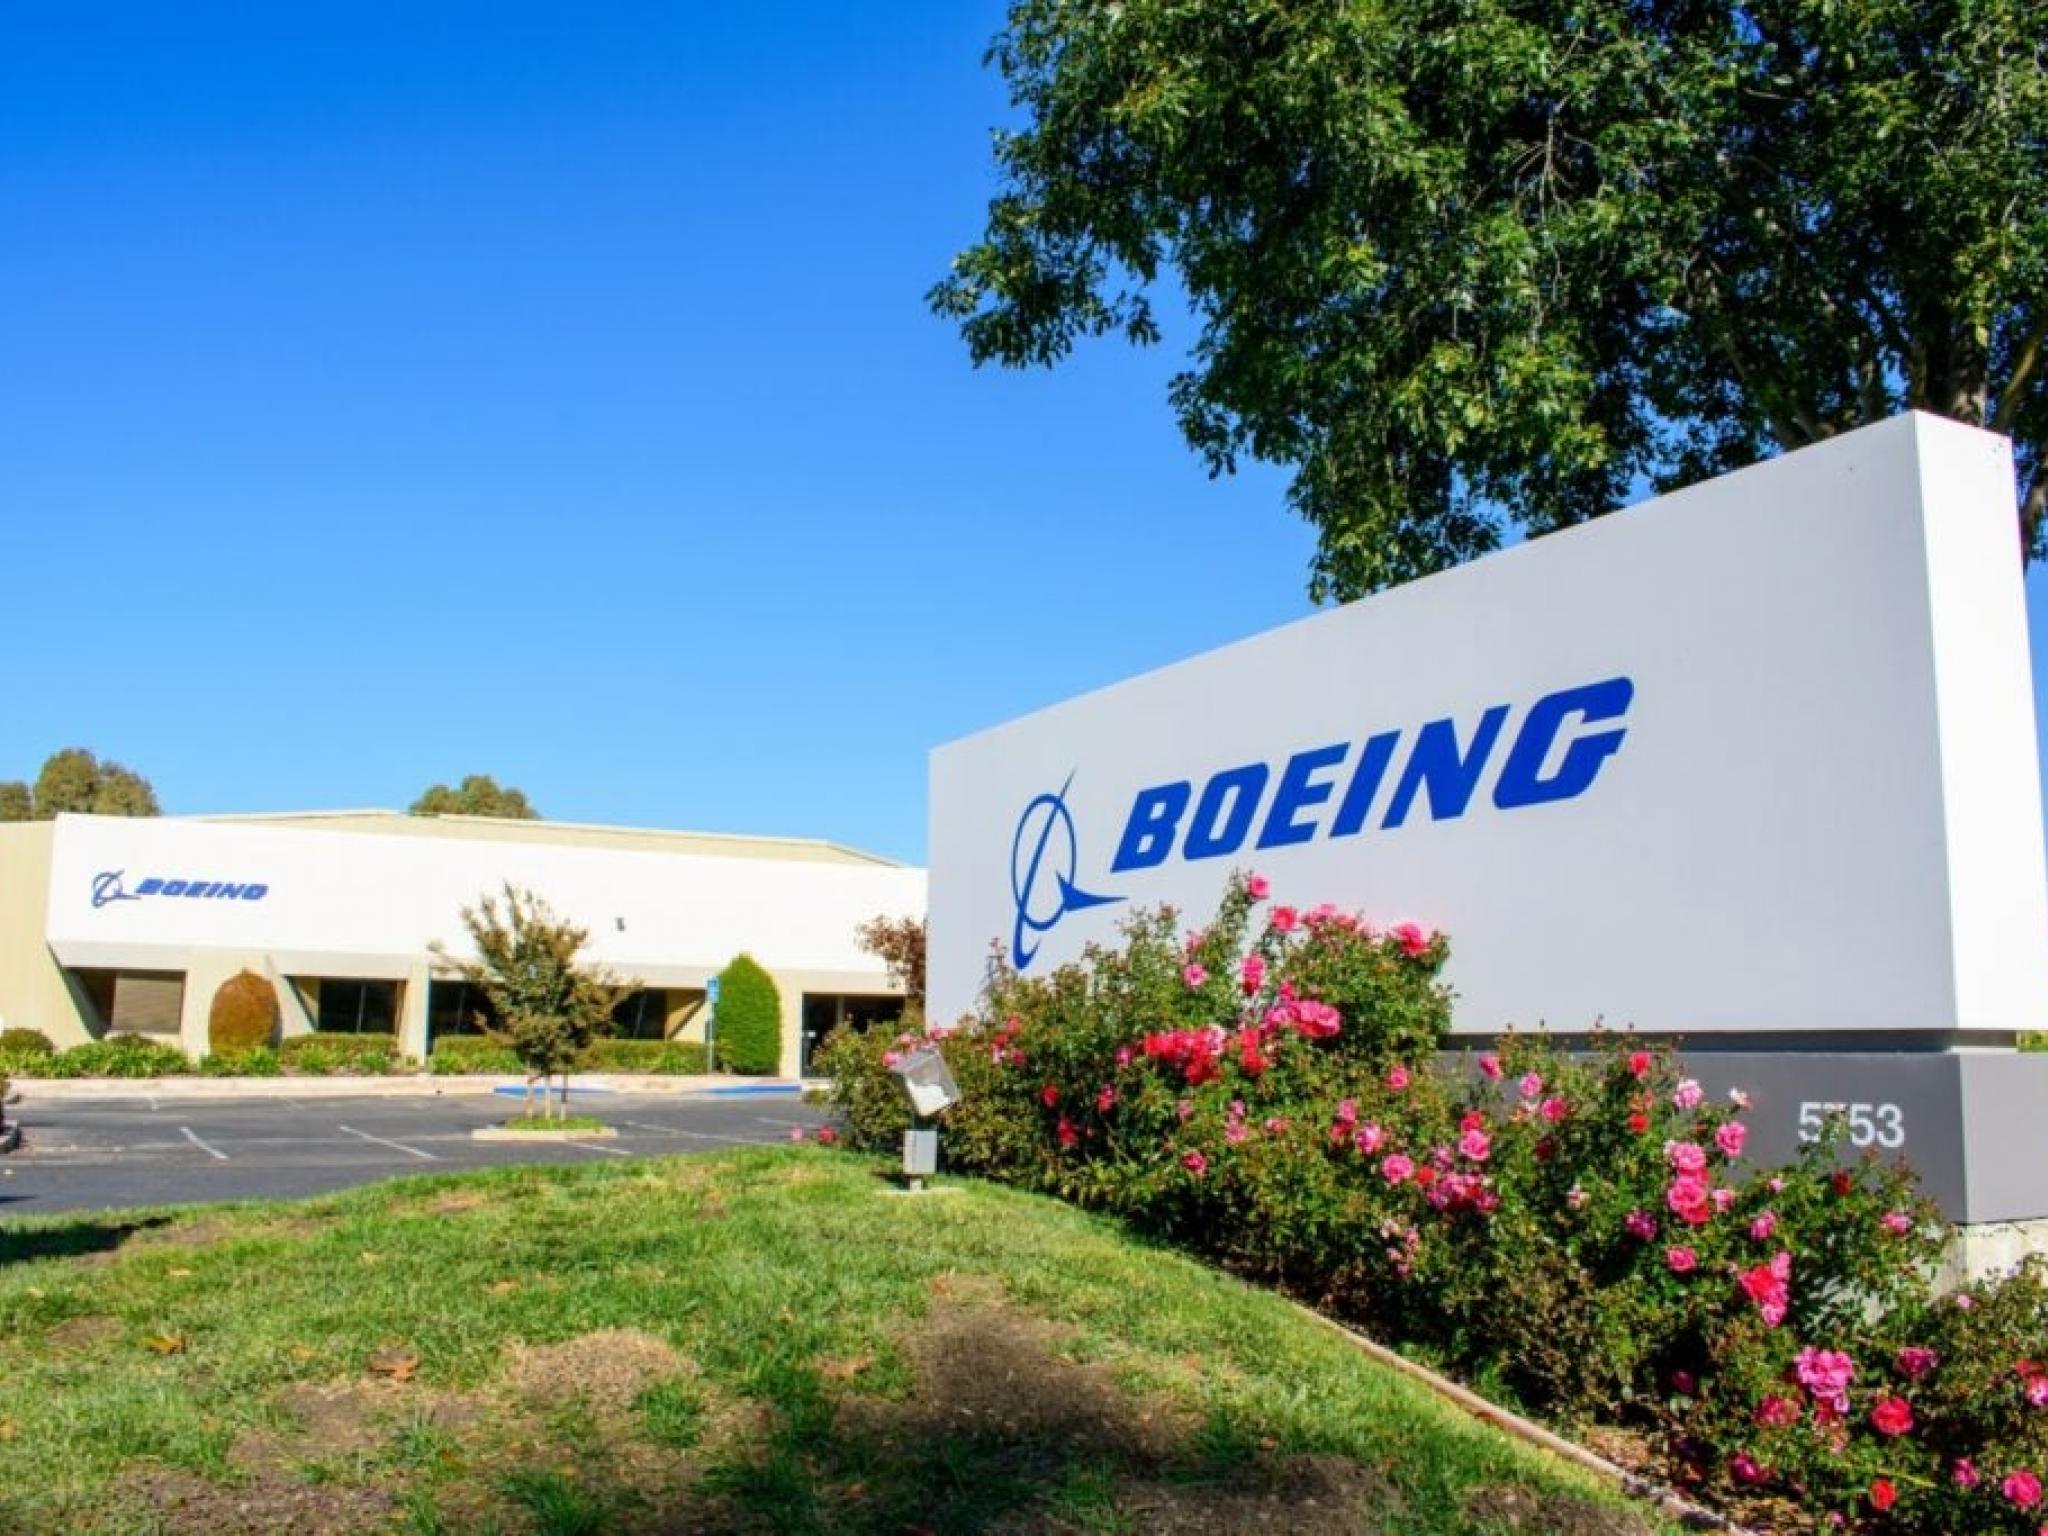  boeing-to-acquire-spirit-aerosystems-for-47b-after-months-of-negotiations 